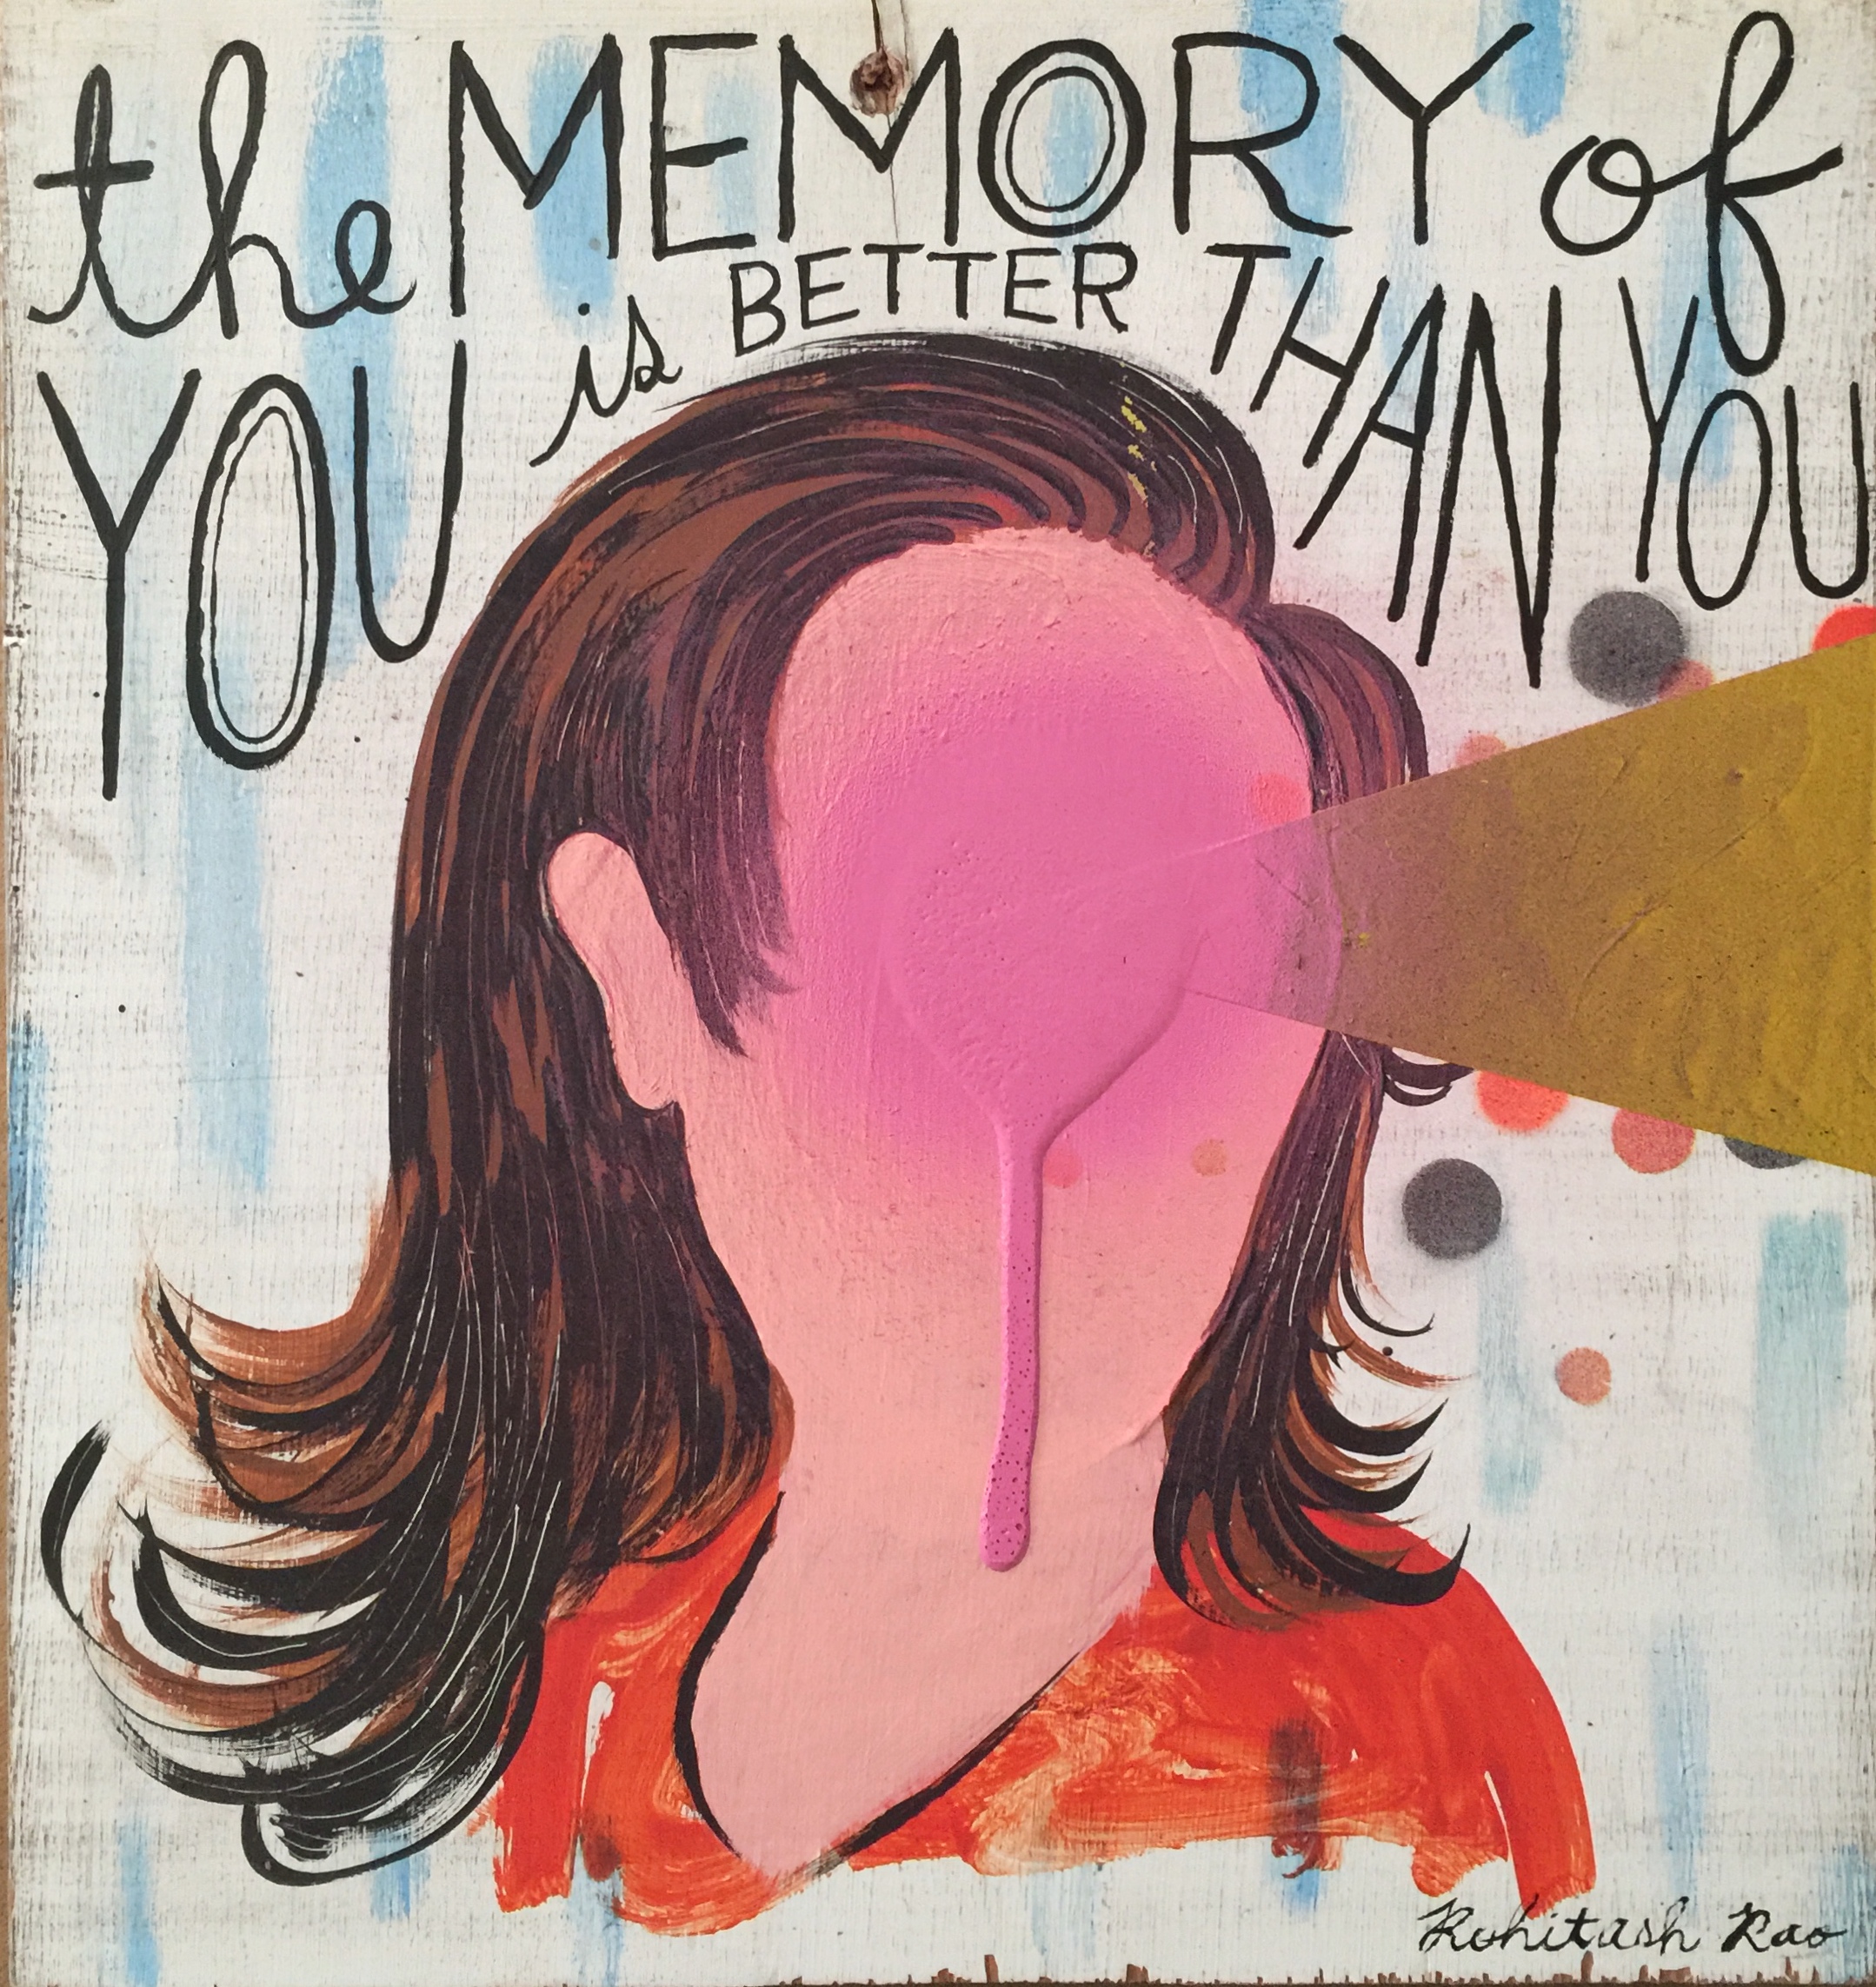 THE MEMORY OF YOU